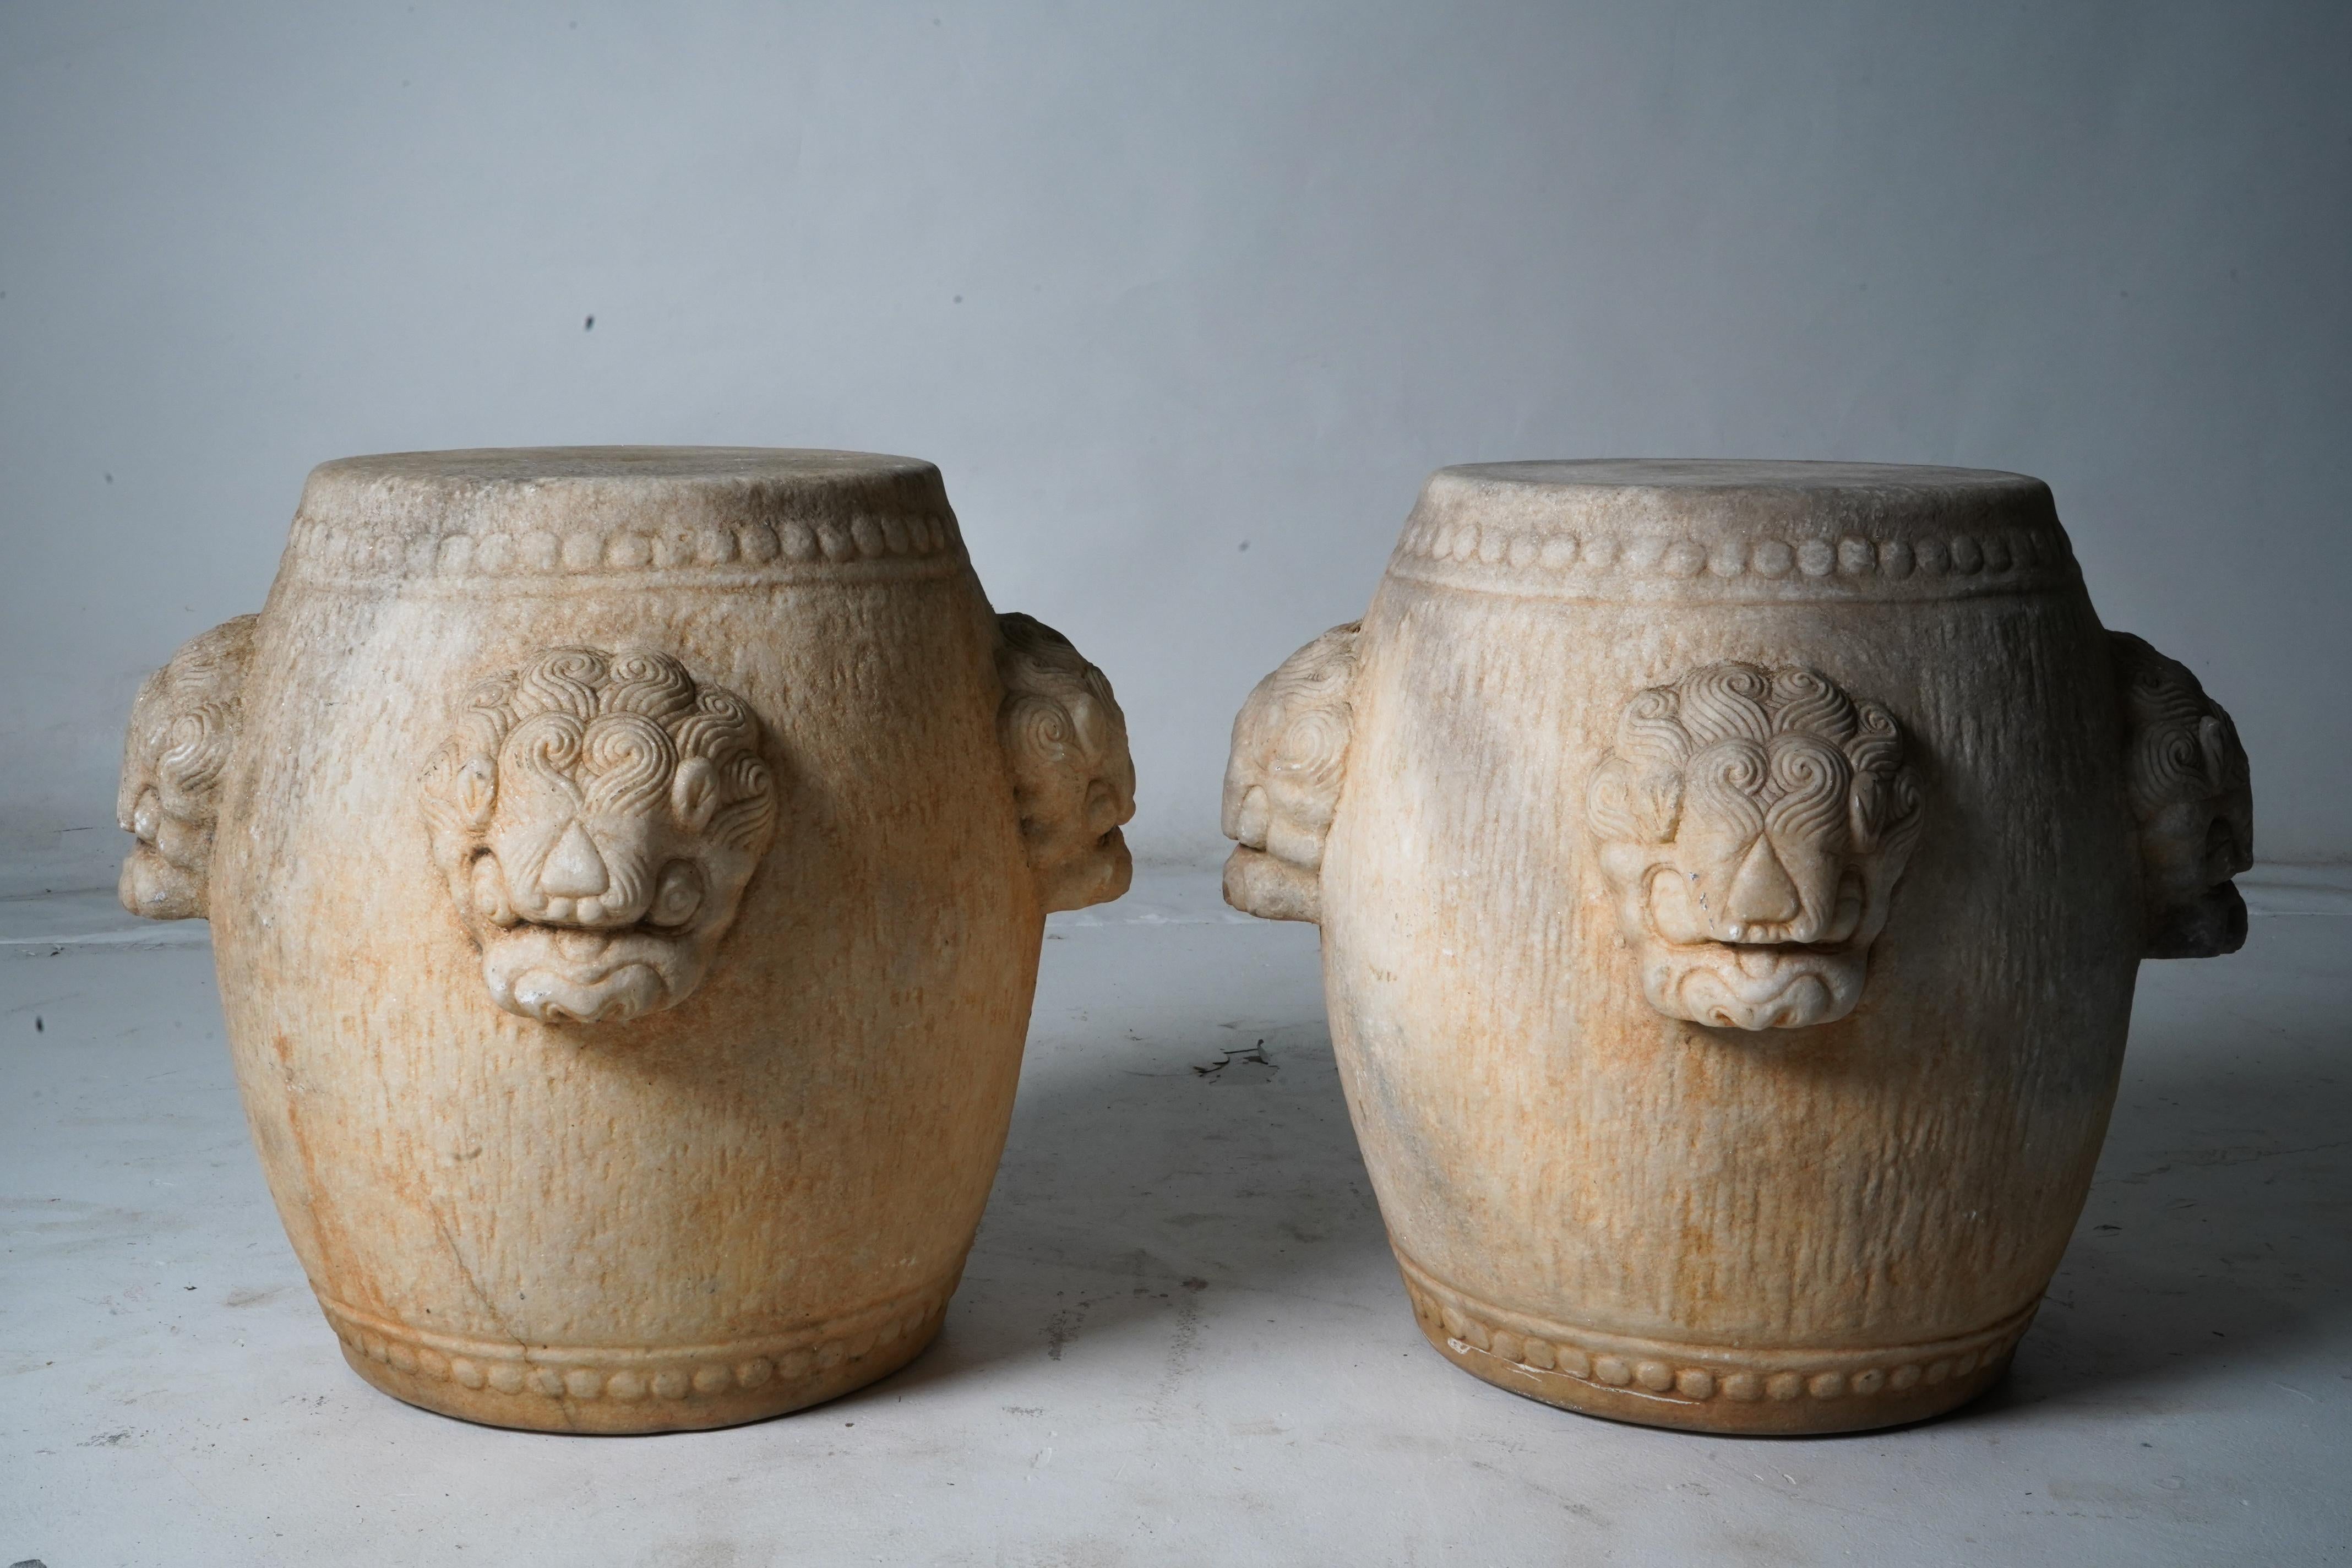 The Marble stools are decorated with protruding lion heads that also act as handles. The marble was sourced in Hebei Province, near Beijing. Price for each.